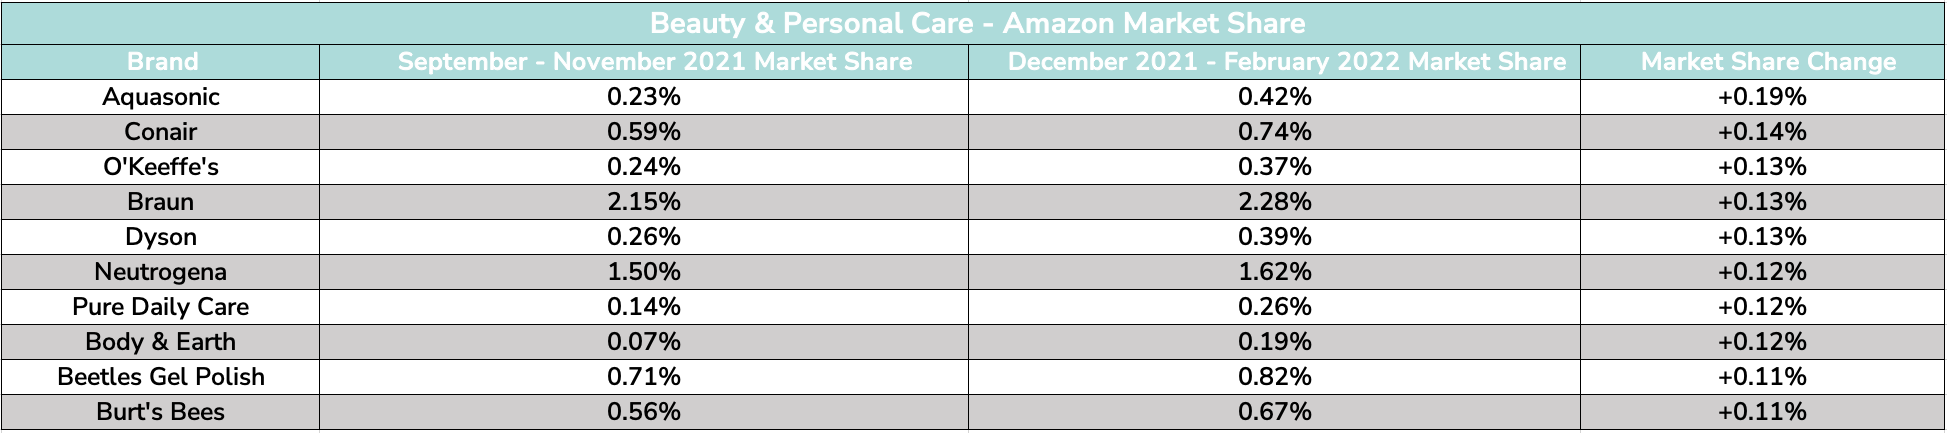 Beauty and Personal Care- Amazon Market Share